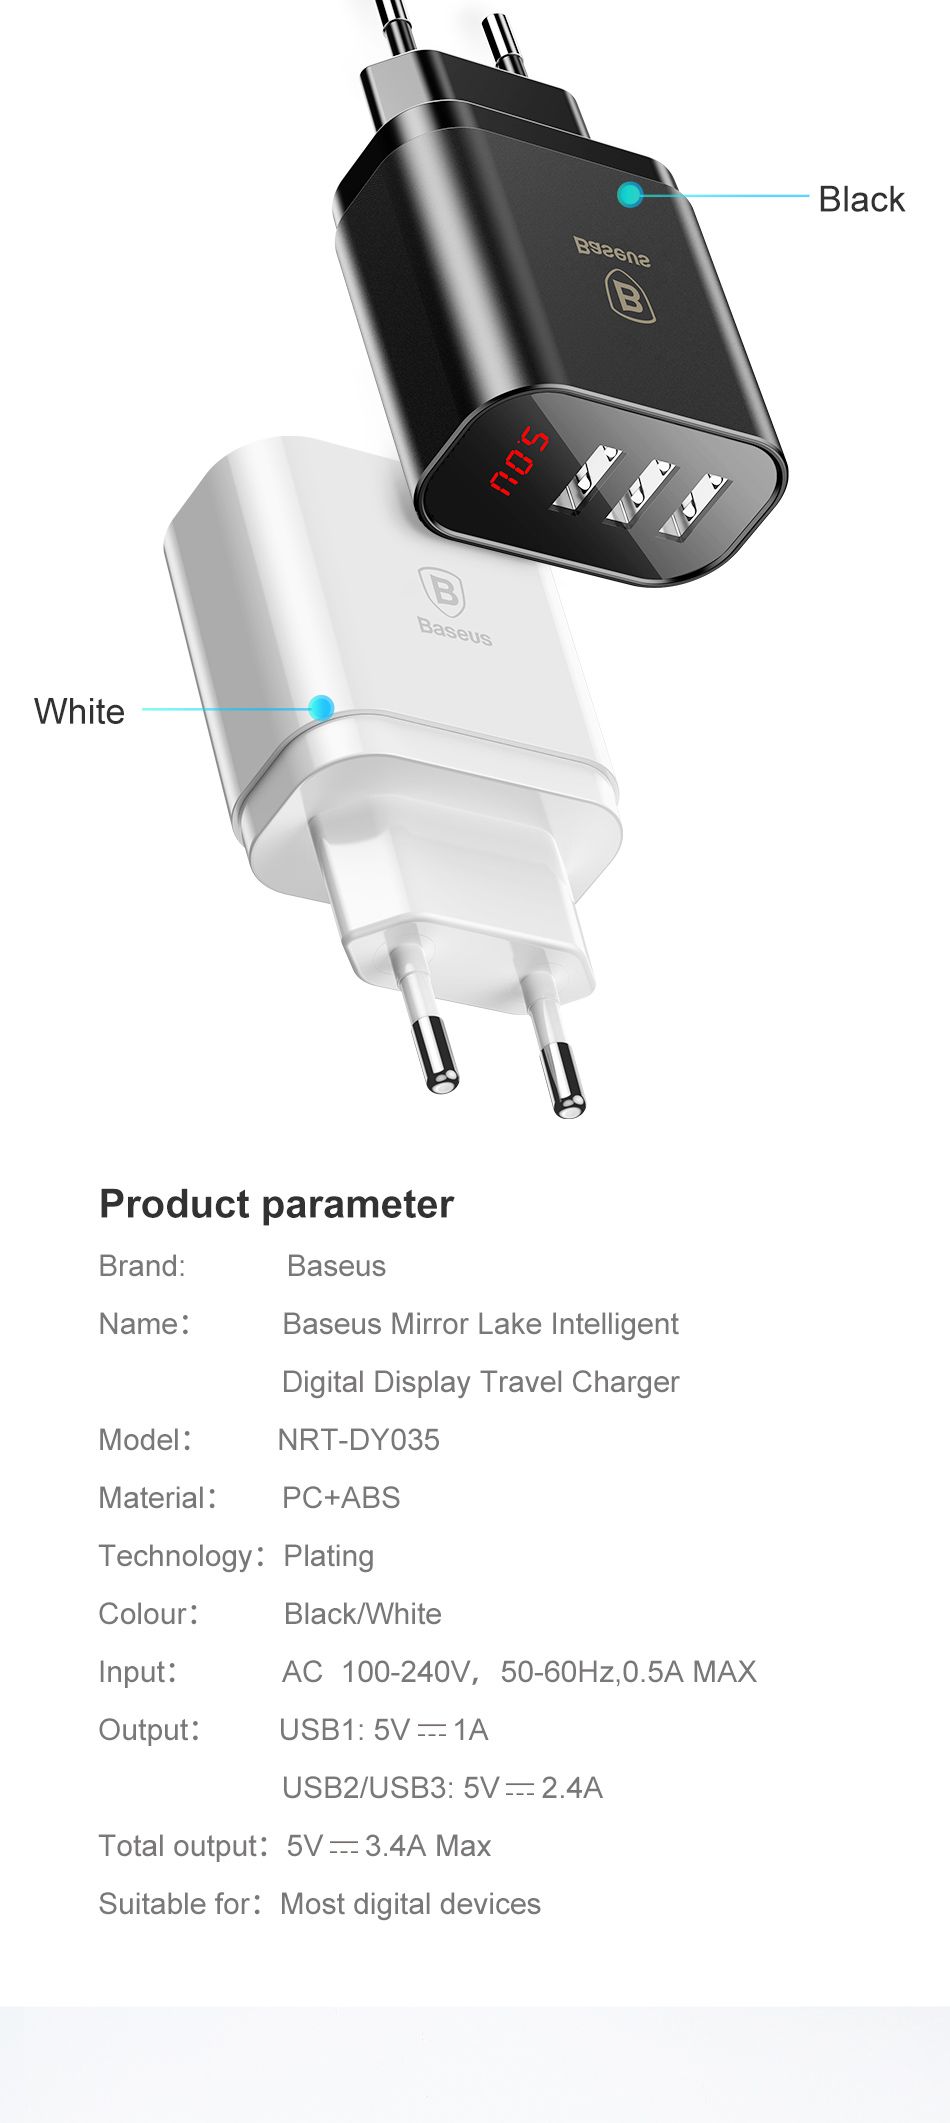 Baseus-Digital-LED-Display-34A-3-USB-Port-Fast-Charging-Wall-Travel-Charger-for-iPhone-X-1310504